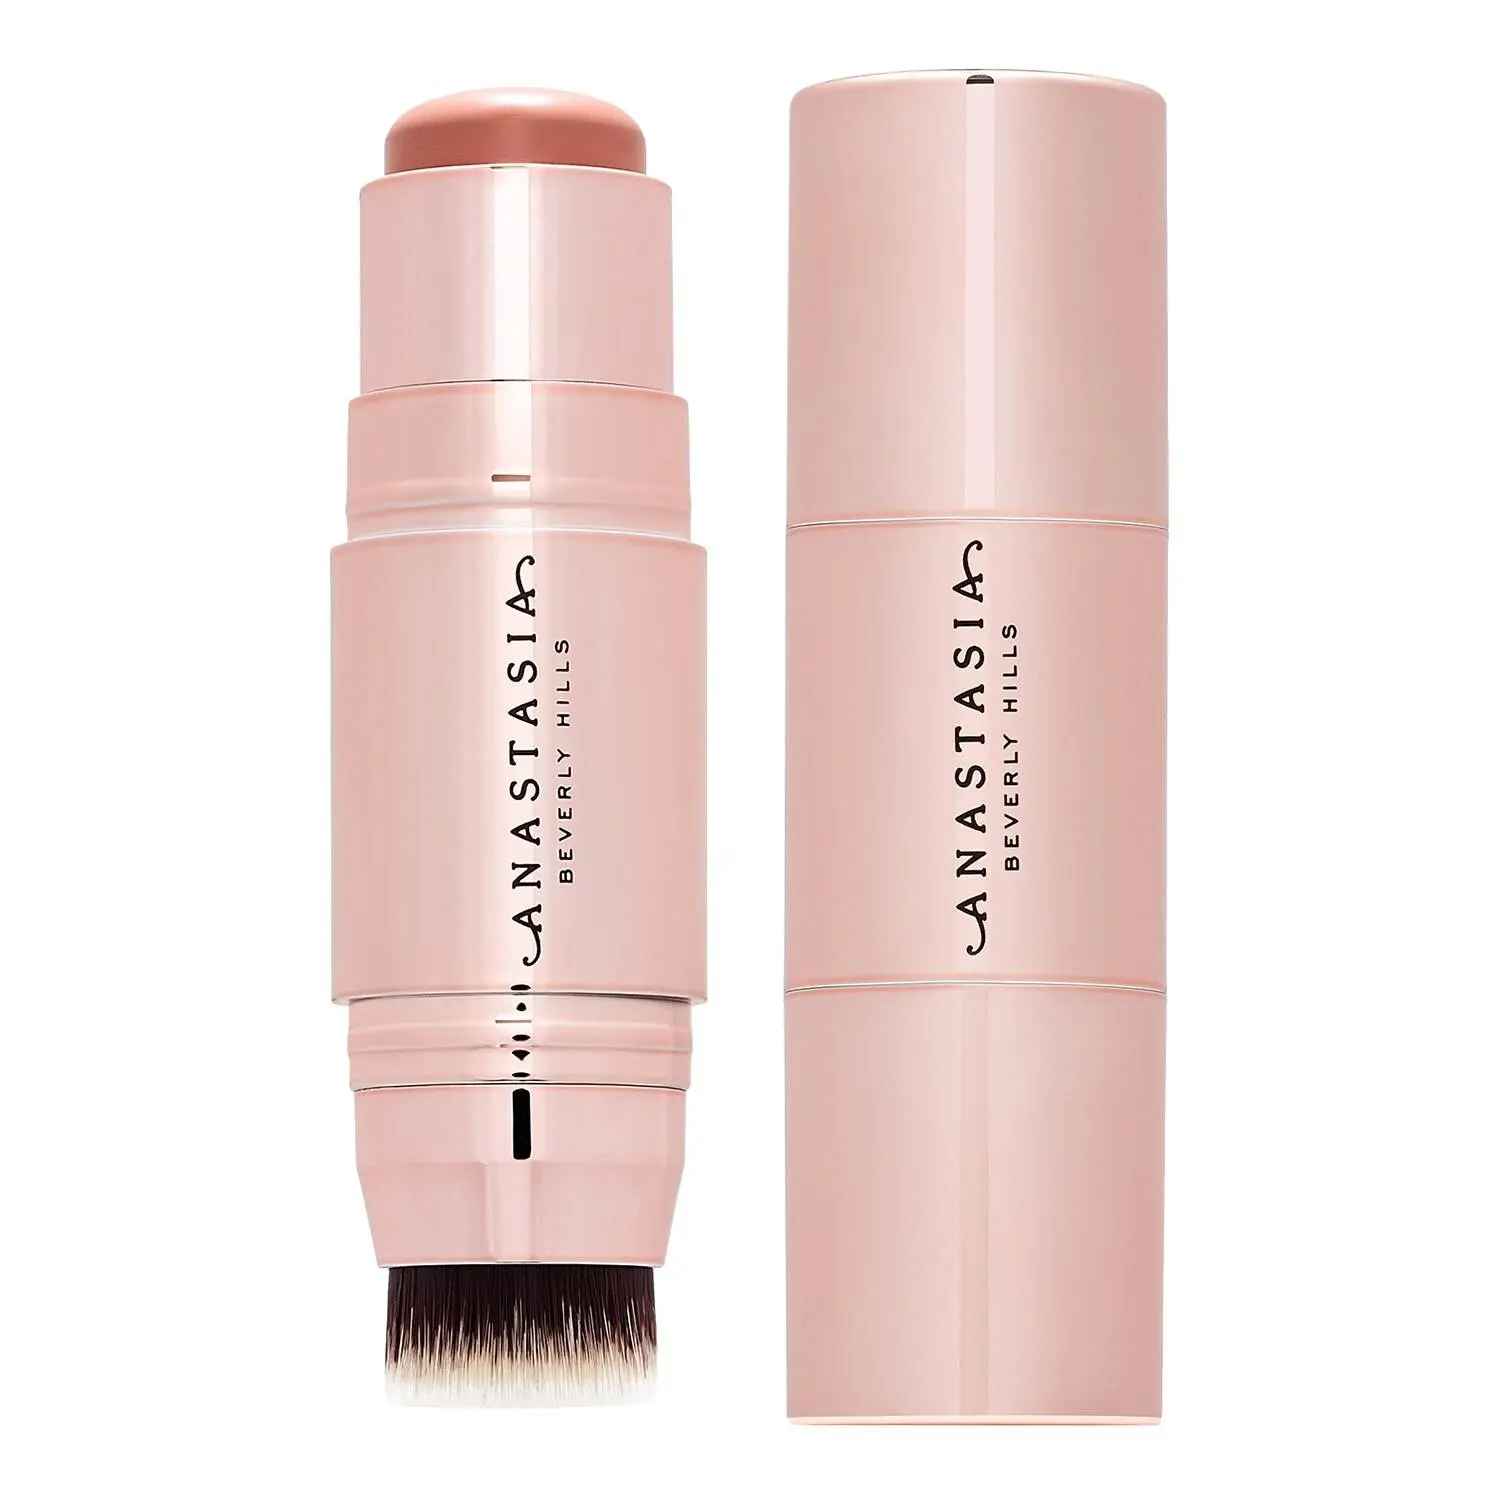 Anastasia Beverly Hills Color Stick Blush Discounts and Cashback